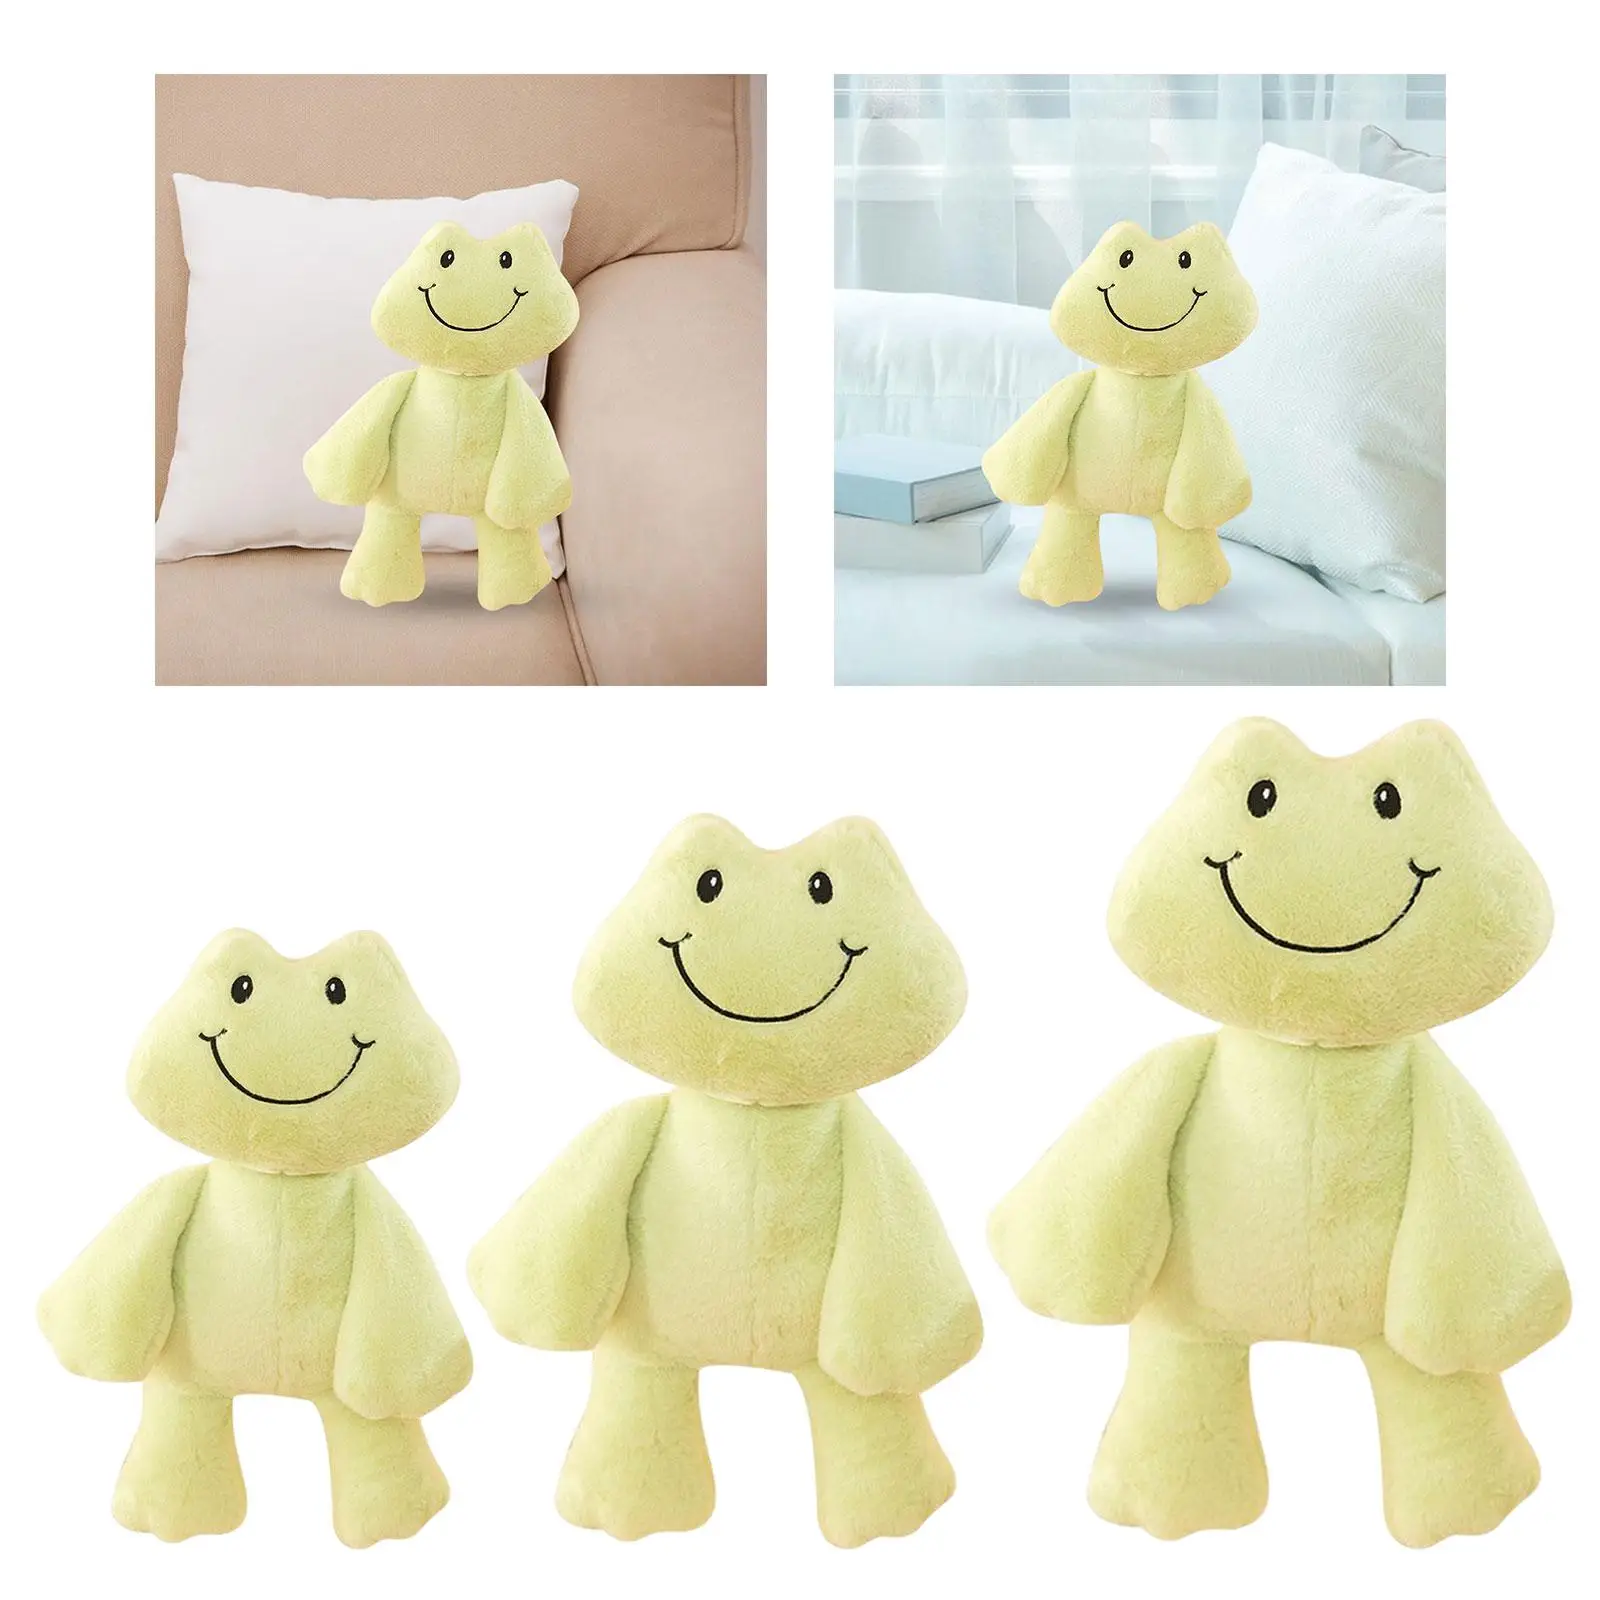 Cuddly Frog Plush Toy Cushion Frog Pillow for Theme Party Toddlers Children